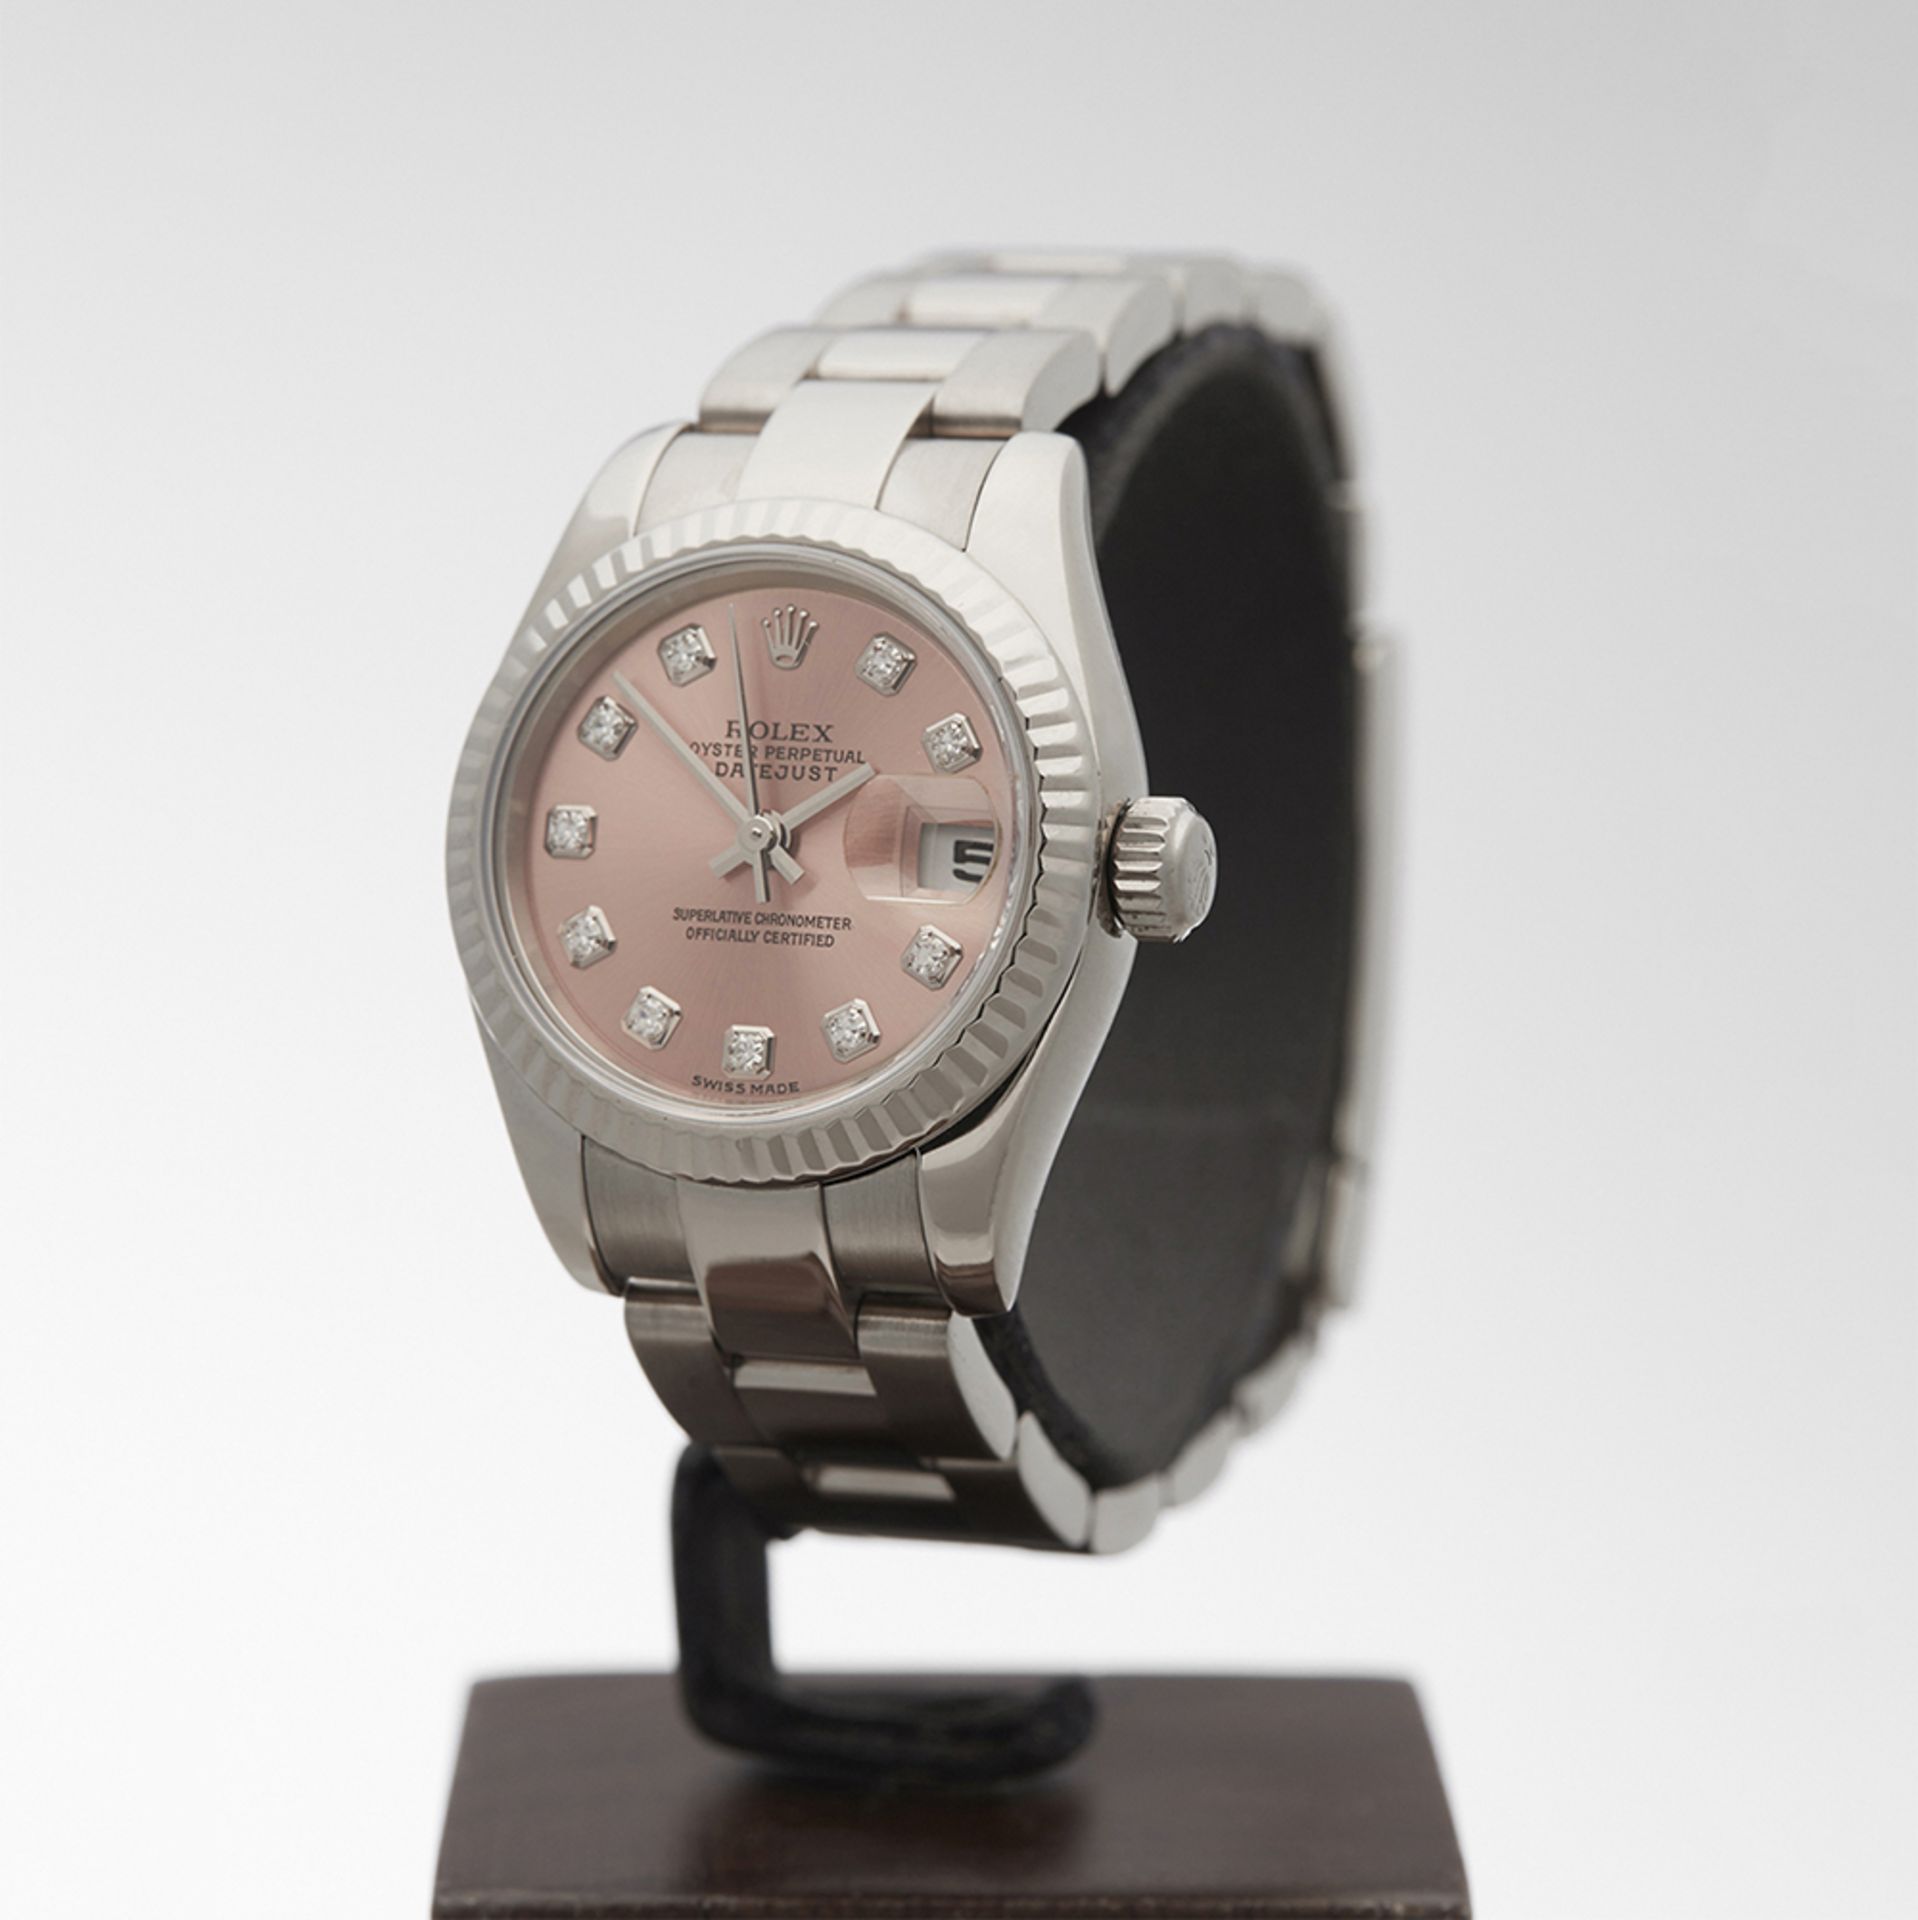 Rolex Datejust 26mm 18k White Gold - 179179 - Image 3 of 9